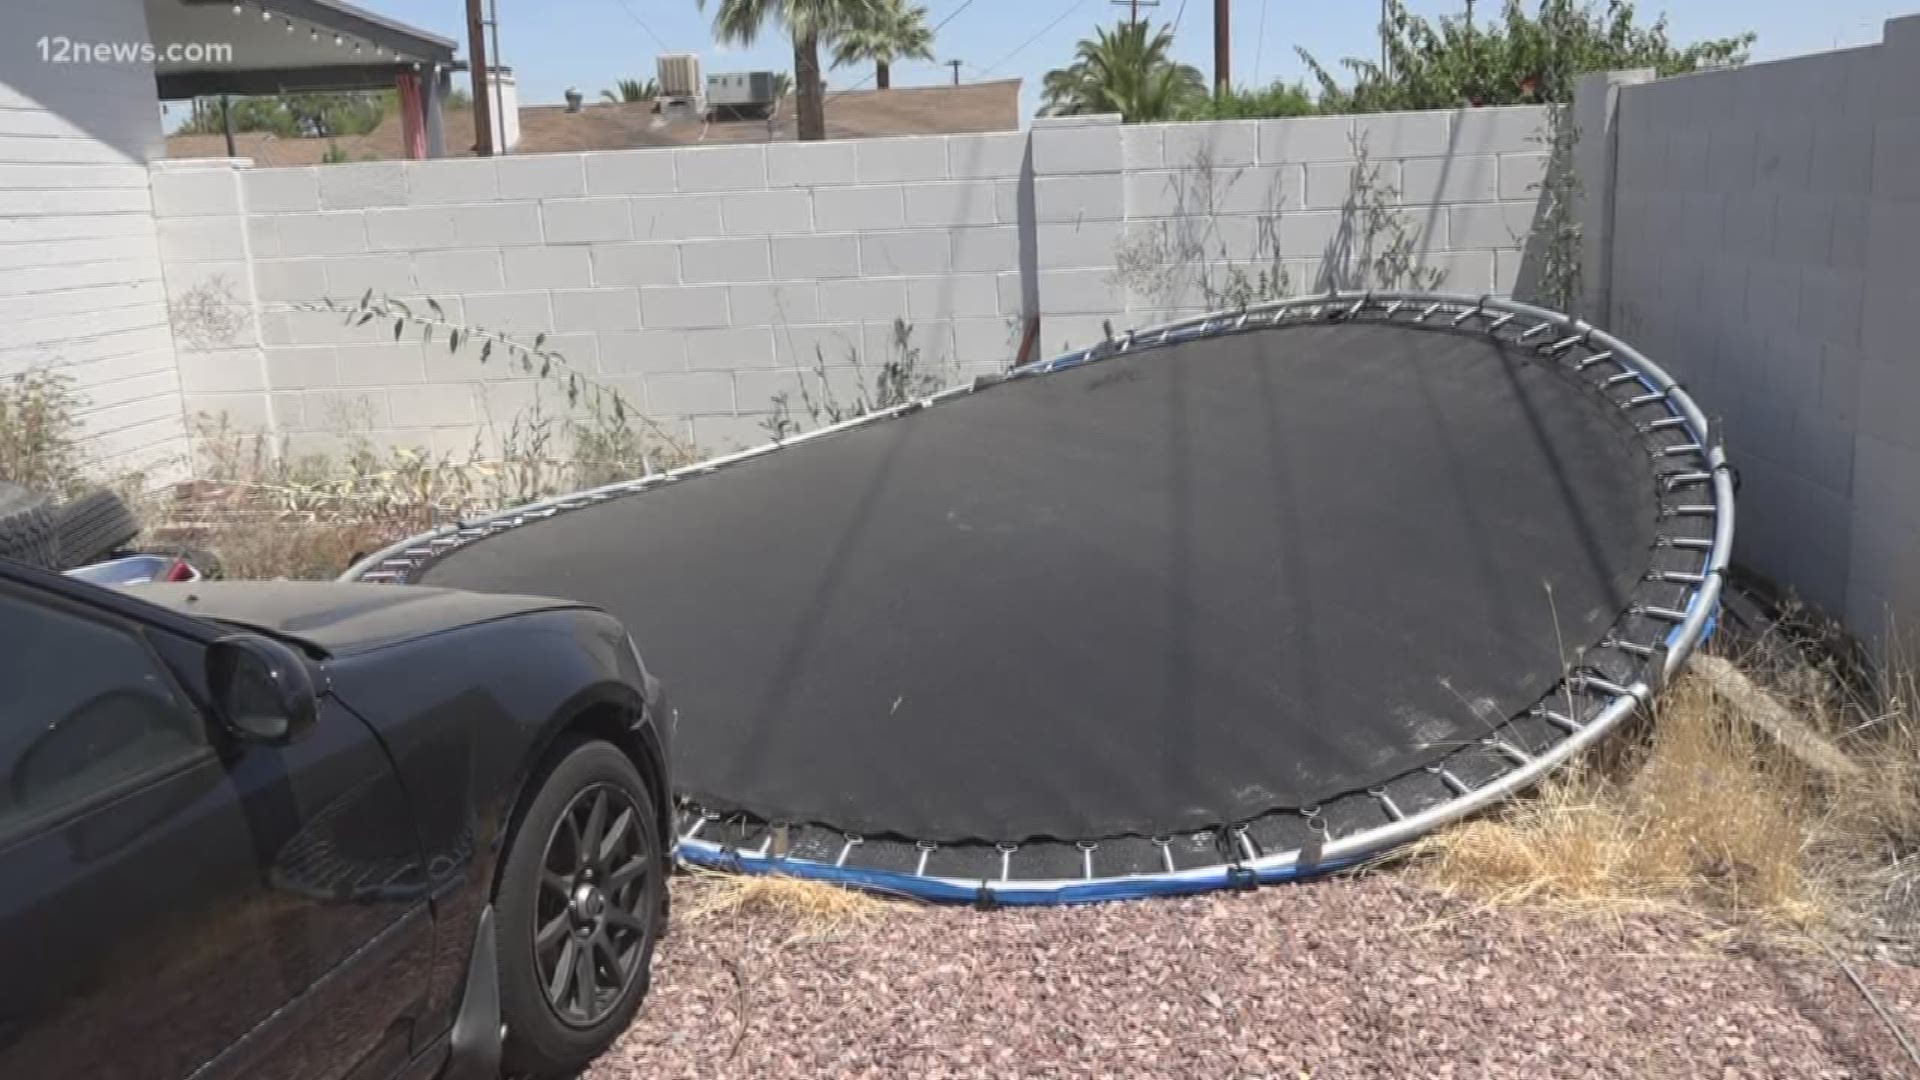 Two boys were playing on a trampoline on Memorial Day when a sudden gust of wind lifted them and the trampoline over a 10-foot wall and into the street. One of the boys had a few bruises while the other ended up fracturing his pelvis and elbow.